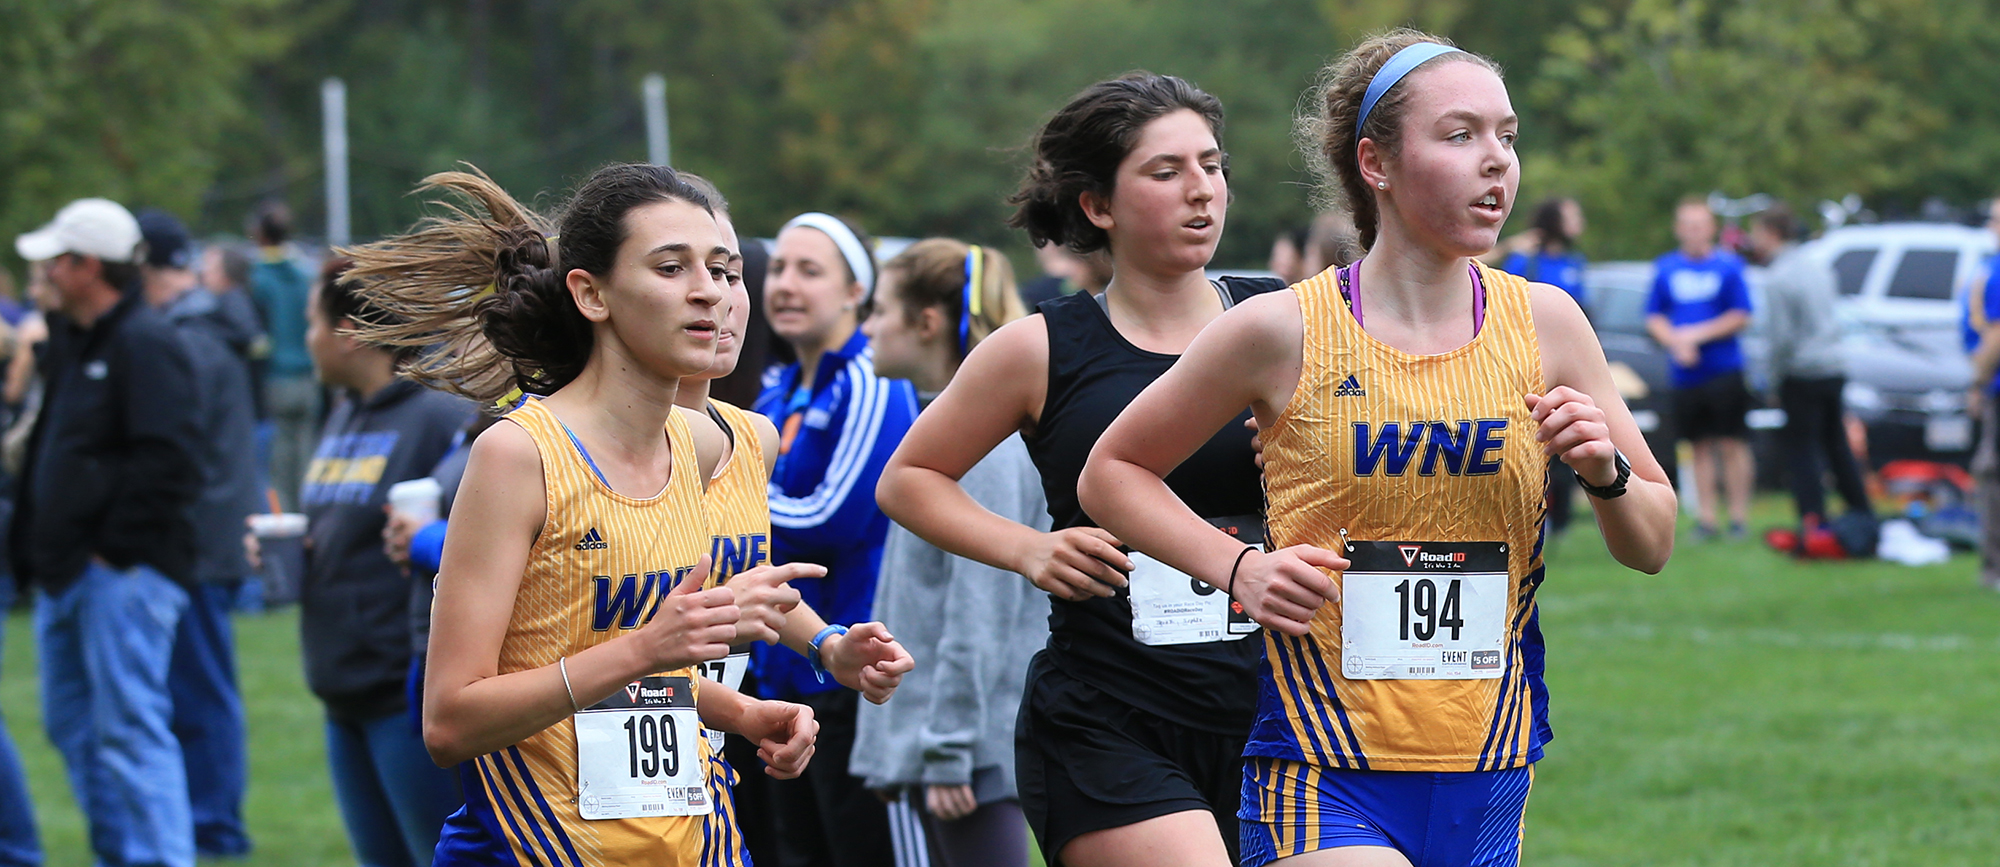 Western New England Wraps Up Season with 38th Place Finish at NCAA New England Regional Championship